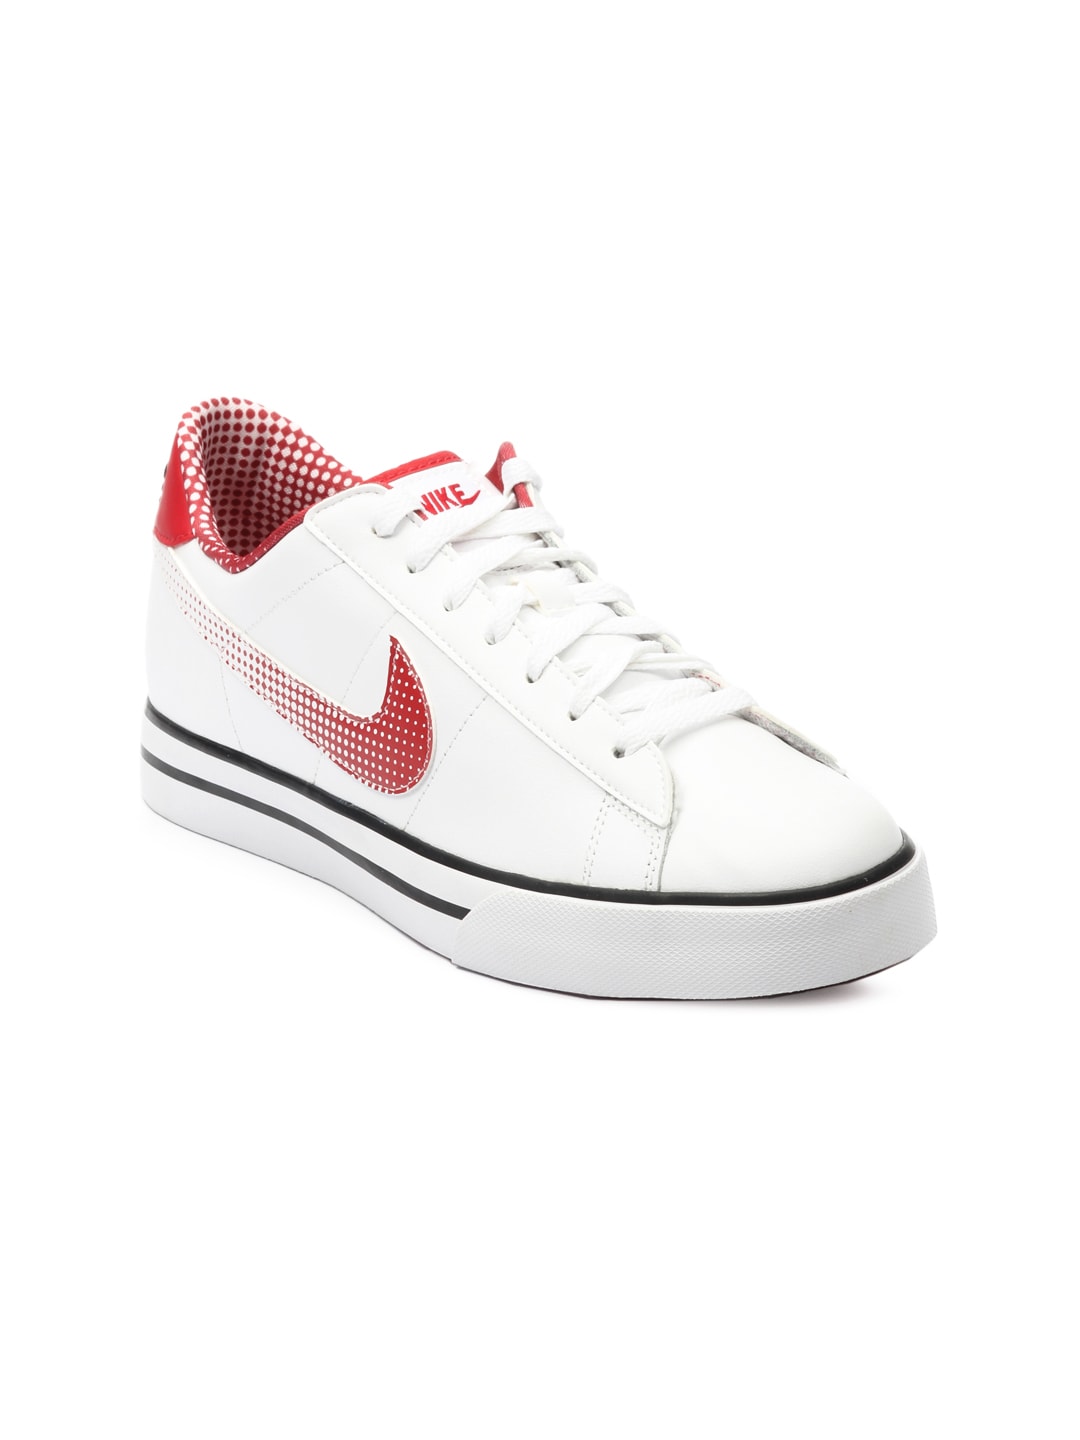 Nike Unisex Sweet Classic Leather White Casual Shoes